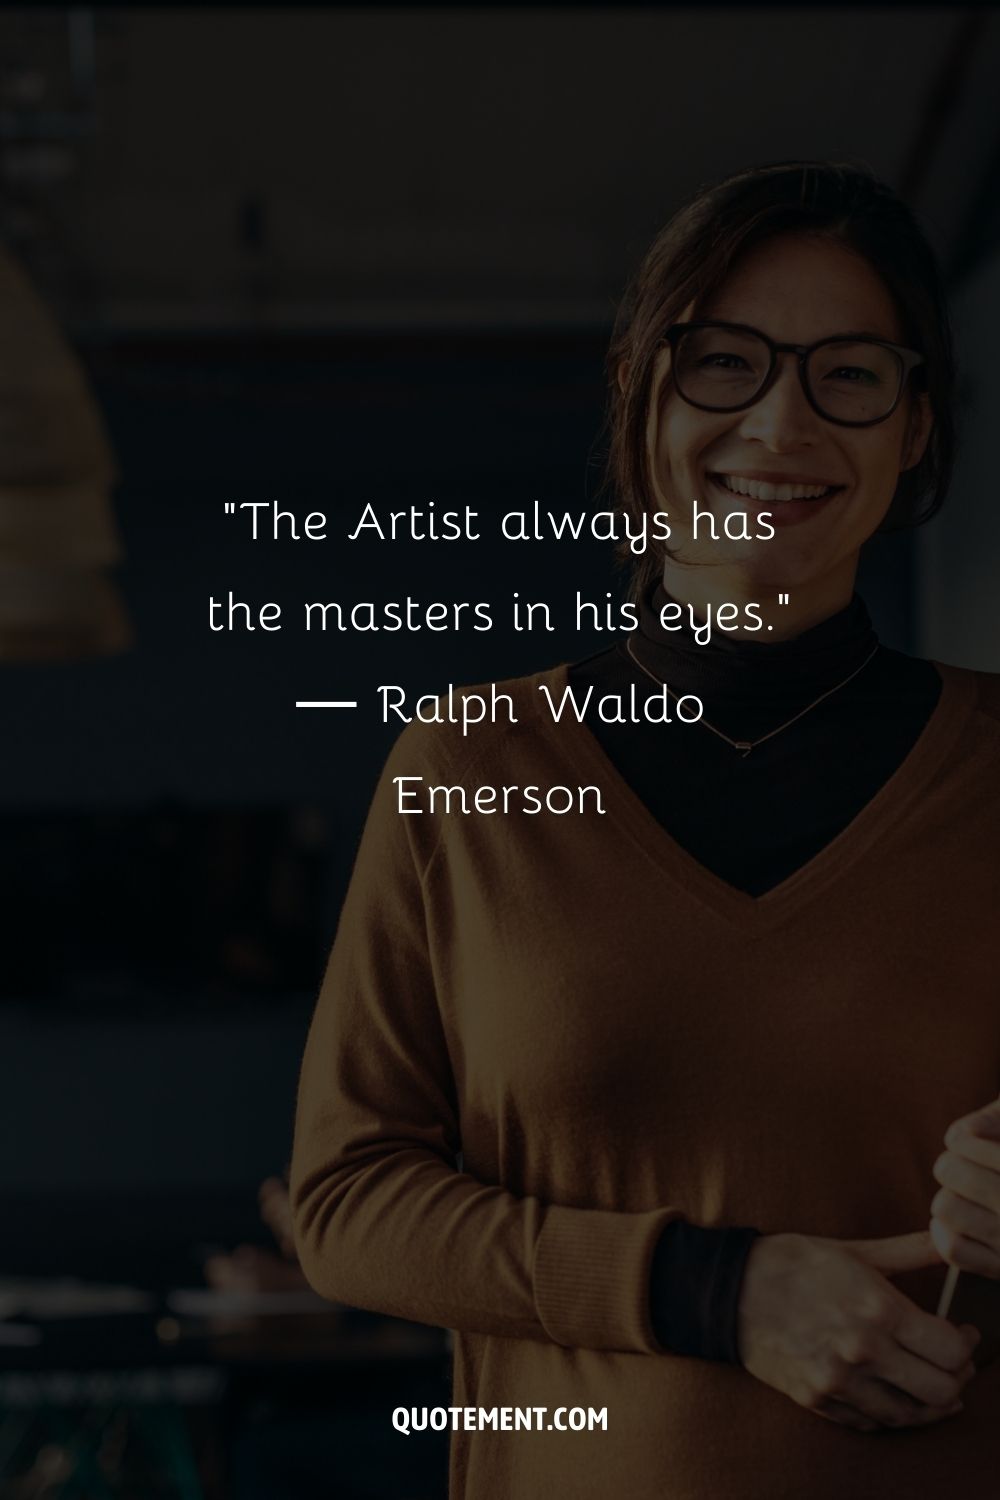 “The Artist always has the masters in his eyes.” ― Ralph Waldo Emerson